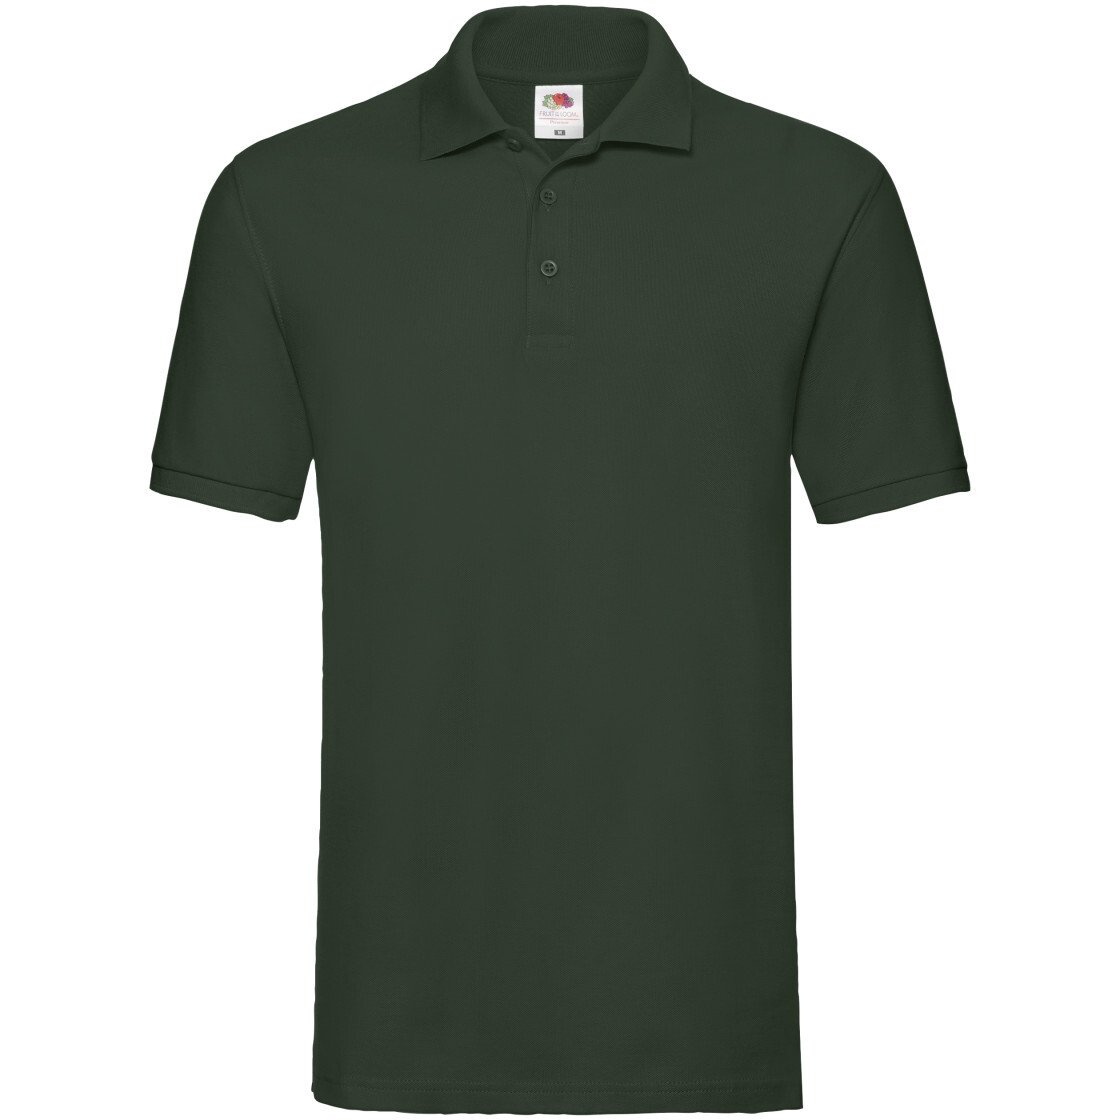 Fruit Of The Loom 63218 Men's Premium Polo Shirt from Lawson HIS